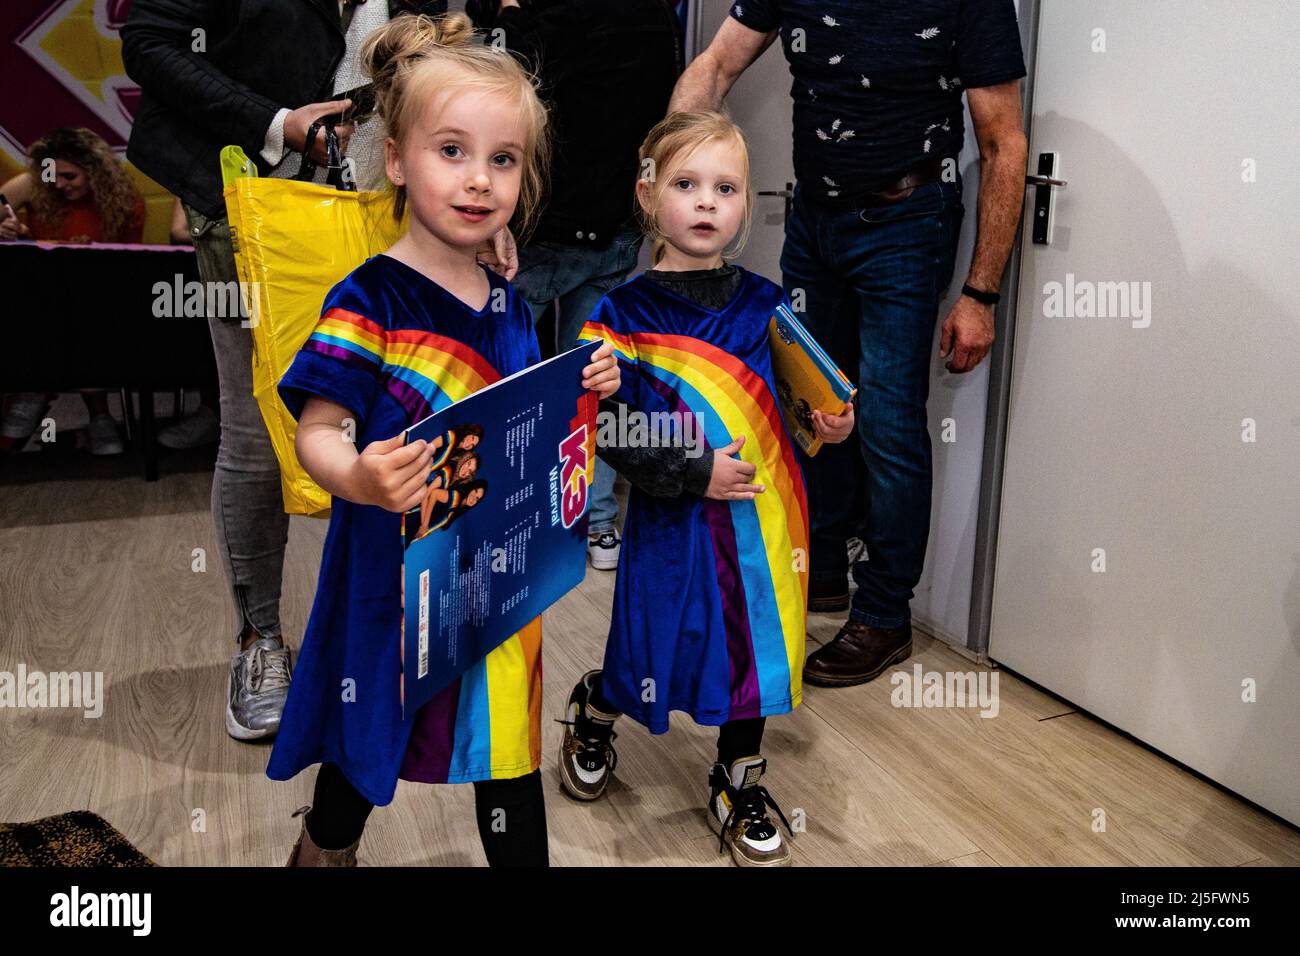 2022-04-23 11:16:05 BERGEN OP ZOOM - The Belgian girl group K3 will sign their new album Waterfall during Record Store Day. Many fans, both very young and older, stood in a line of more than a hundred meters for a long time, but for many it was well worth the wait. ANP KIPPA PAUL BERGEN netherlands out - belgium out Credit: ANP/Alamy Live News Stock Photo